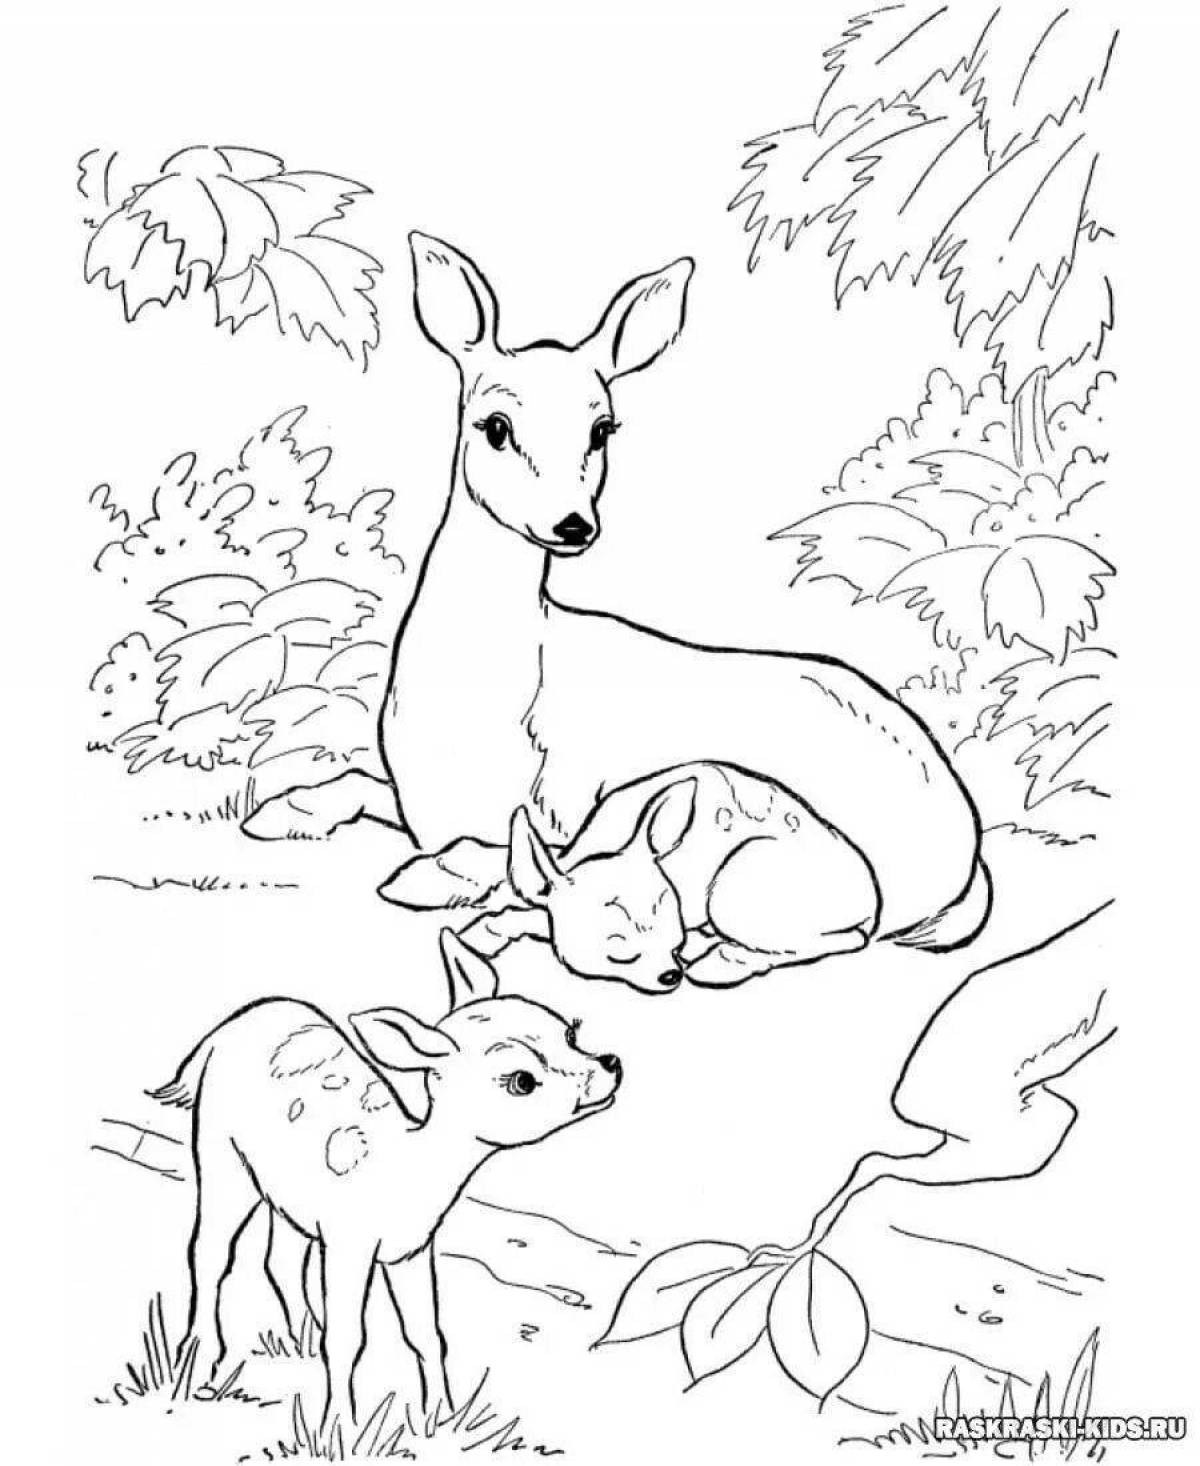 Glittering nature and animals coloring book